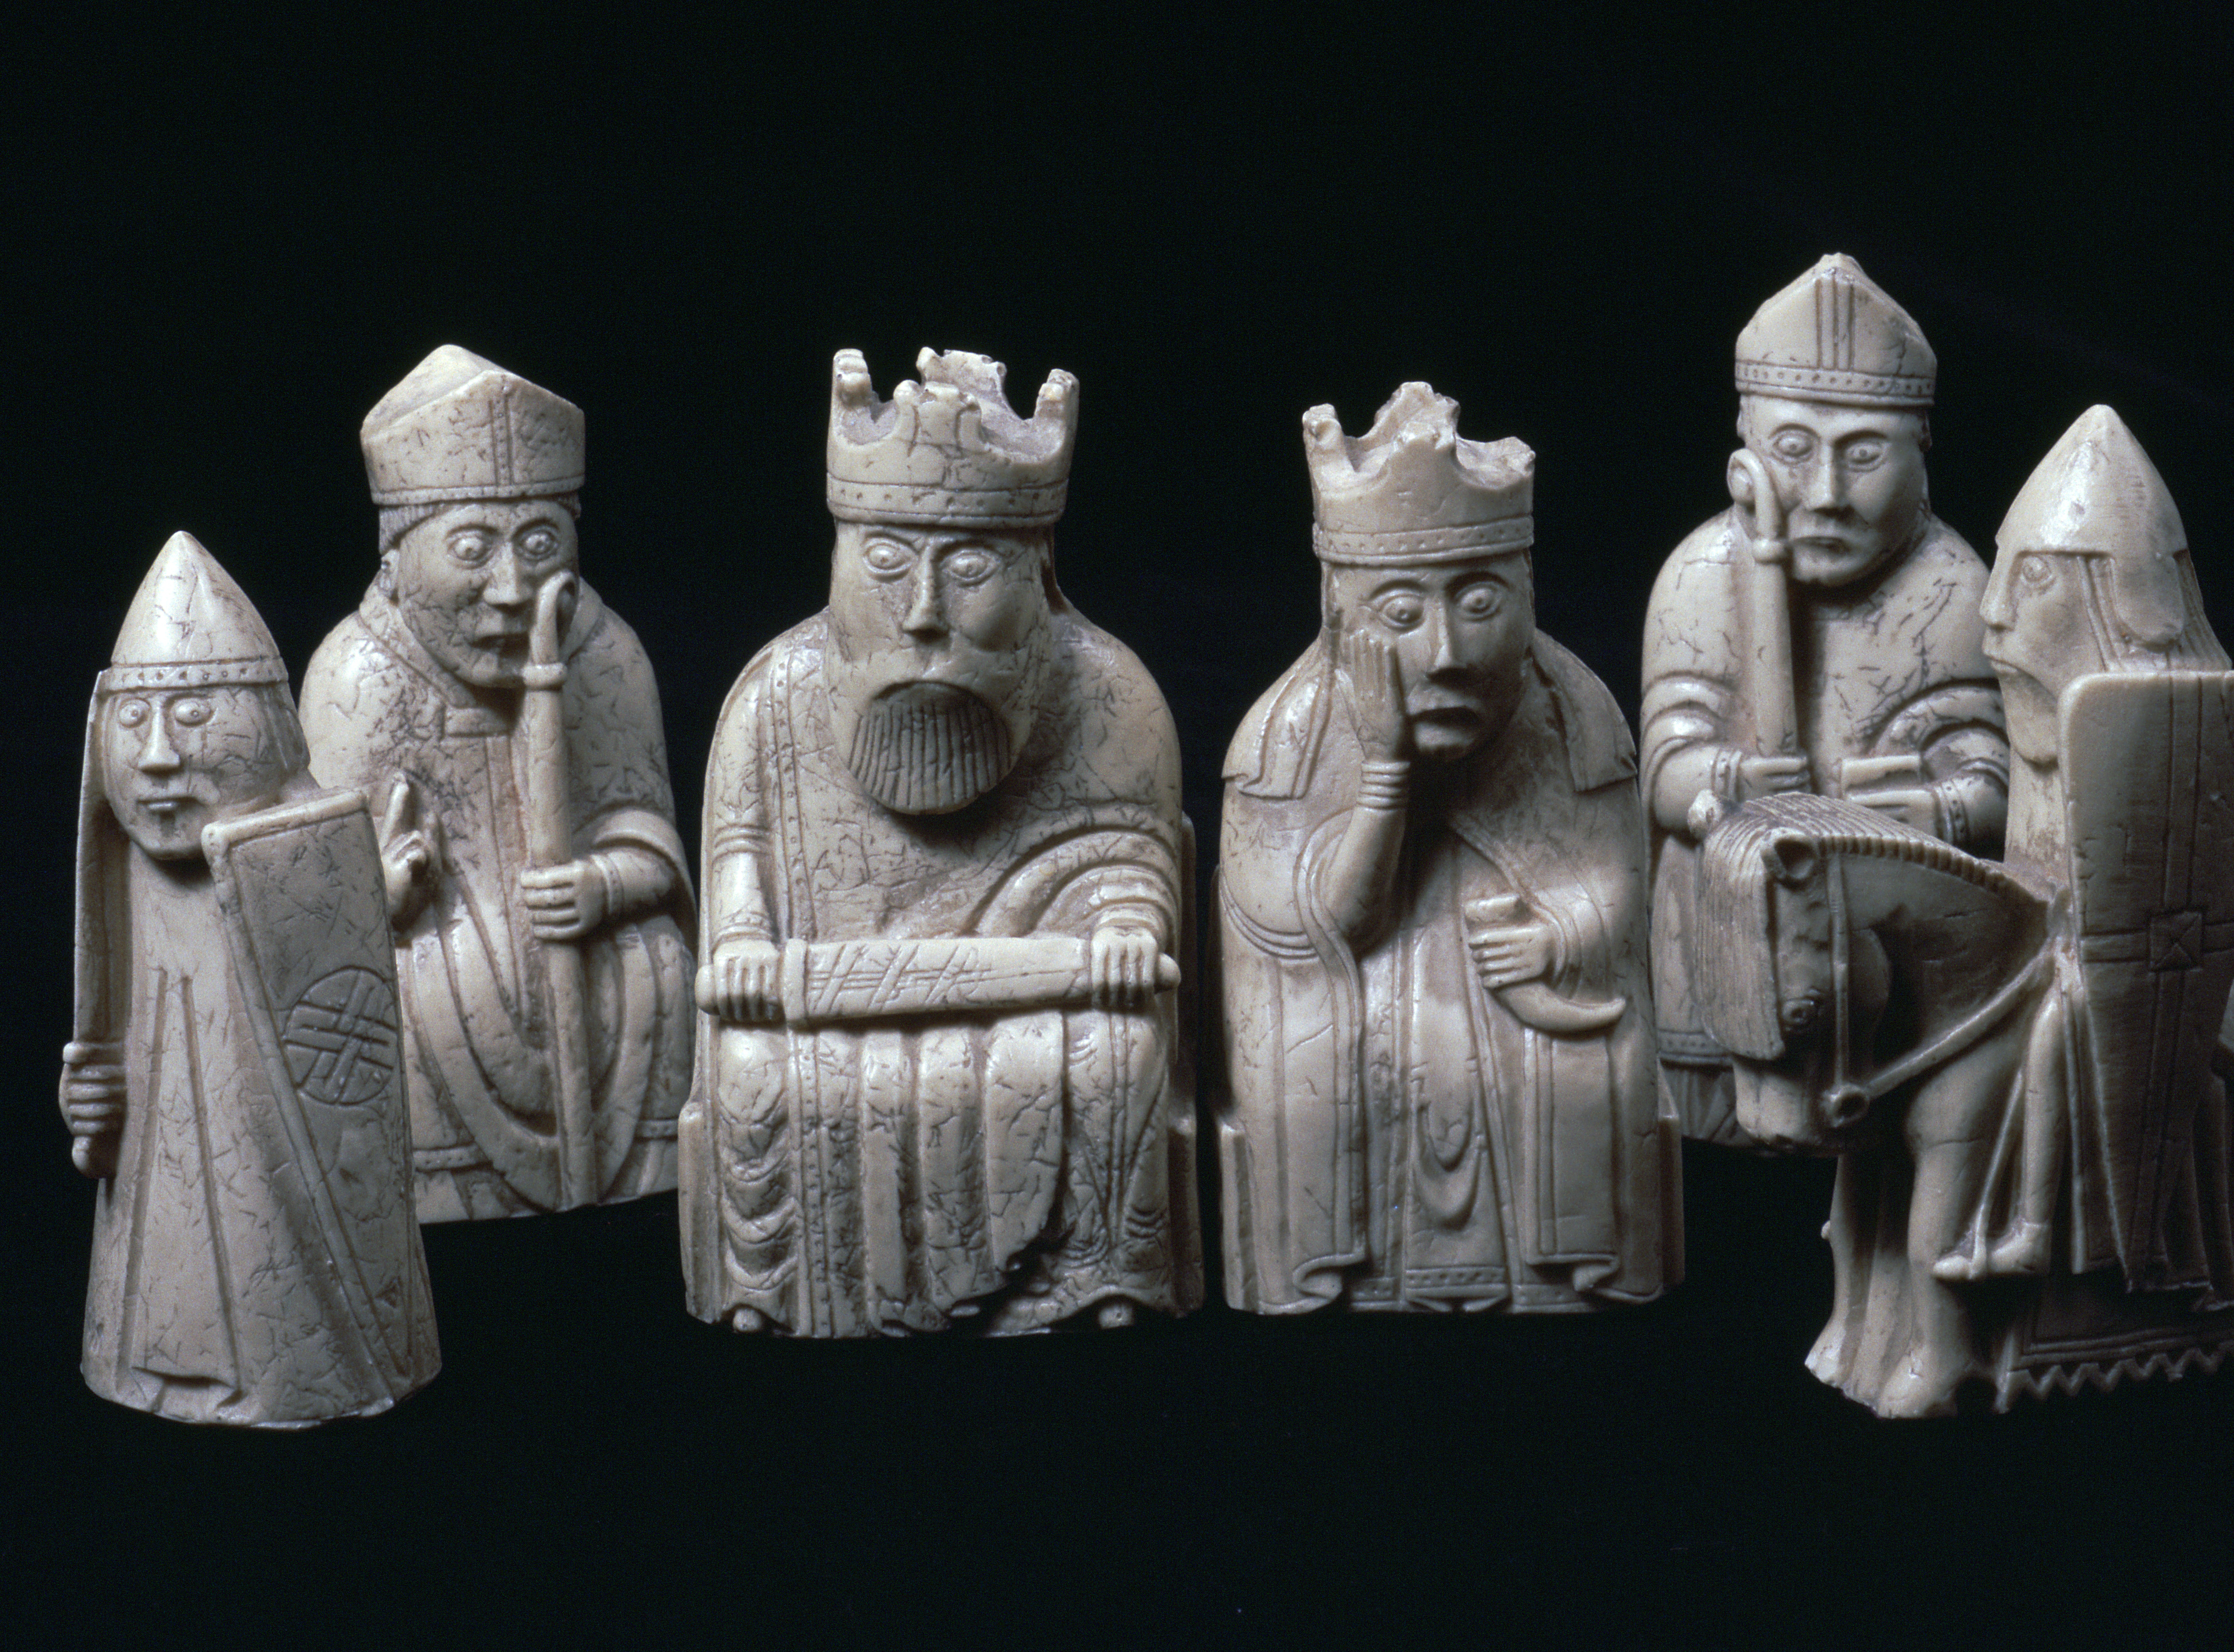 The Lewis Chessmen - part of the British Museum's collection.